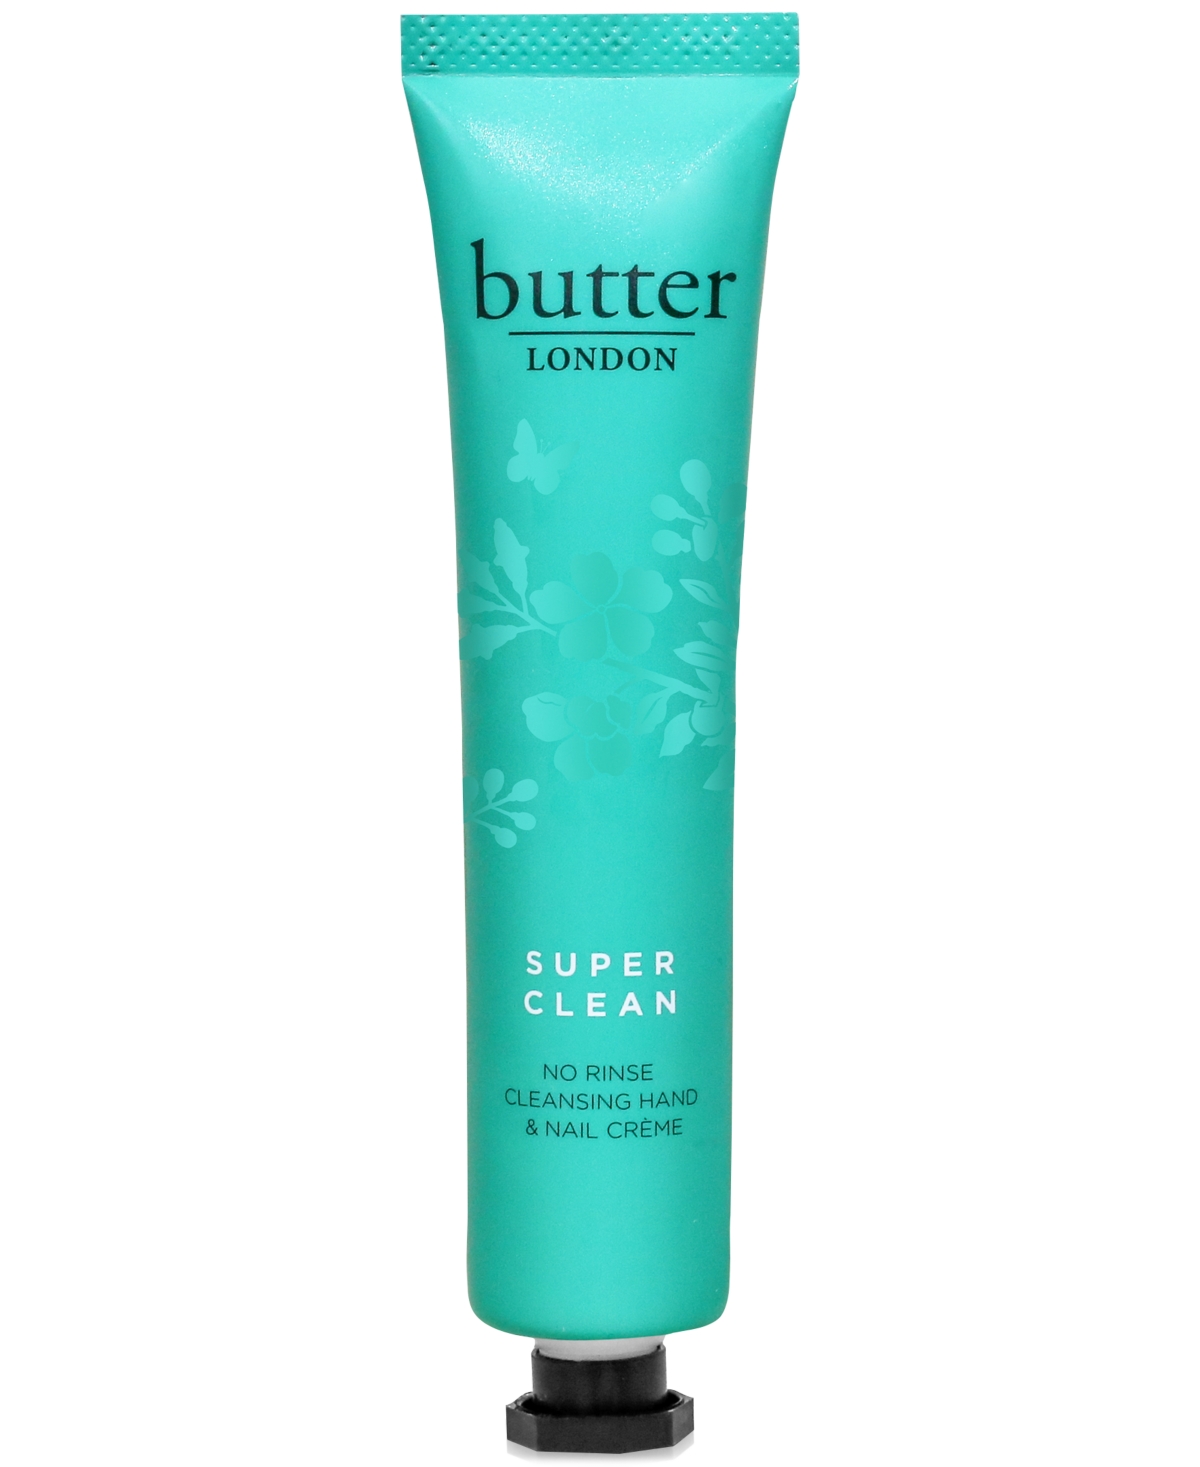 Butter London Super Clean Hand & Nail Creme In N/a